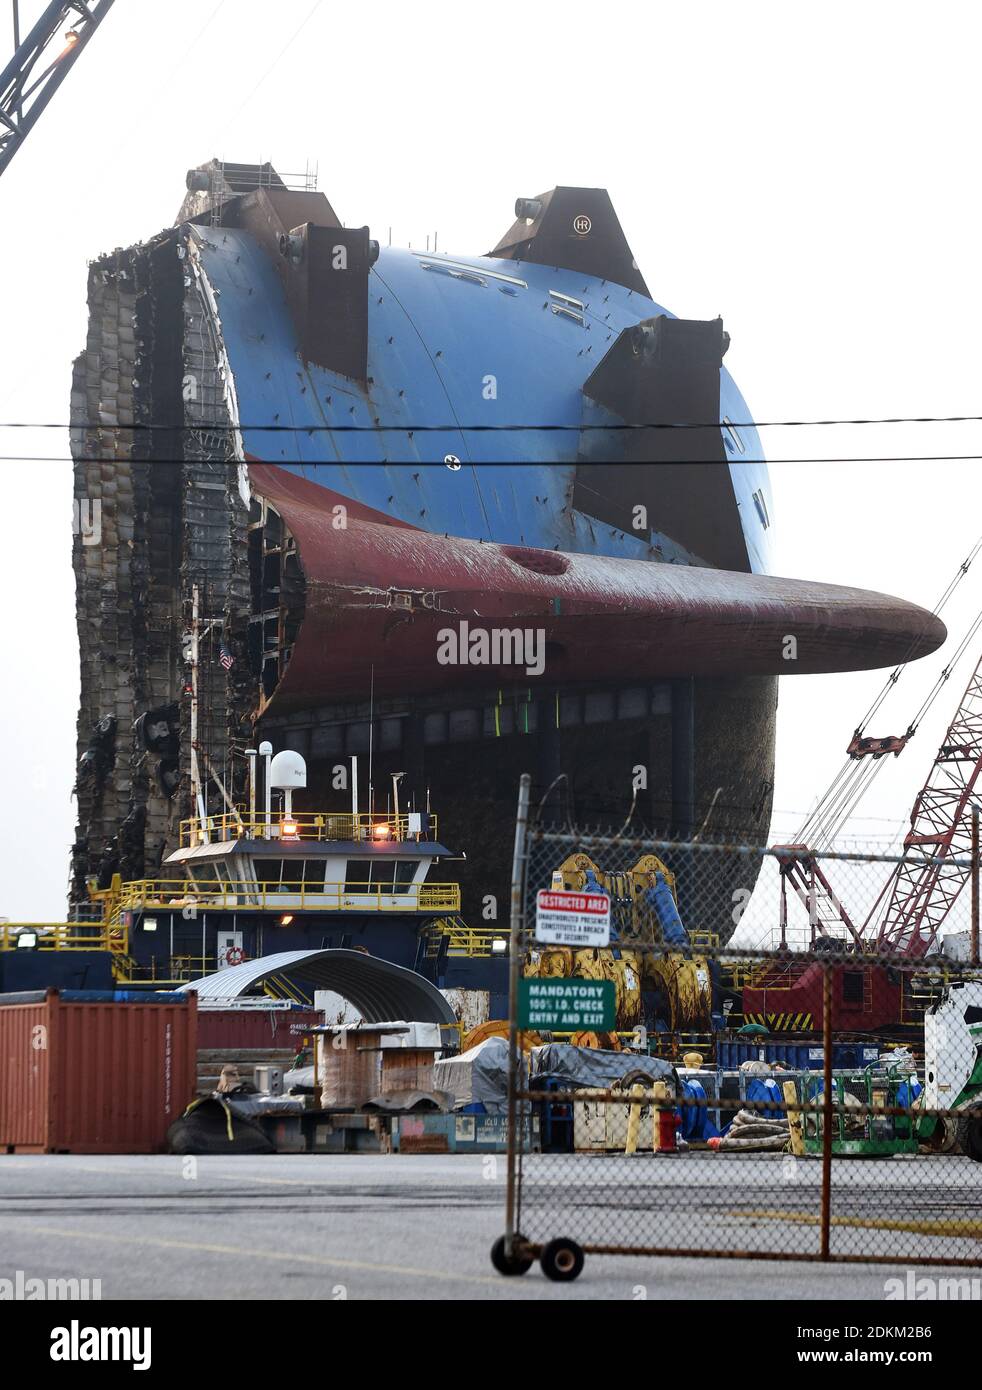 Georgia, USA. 14th Dec, 2020. December 13, 2020 - Brunswick, Georgia, United States - The bow section of the Golden Ray cargo ship sits on a barge on December 13, 2020 in Brunswick, Georgia. A salvage company is cutting the vessel into eight segments, each of which will be removed by a barge and scrapped. The vehicle carrier, loaded with 4200 new cars, capsized in St. Simons Island Sound on September 8, 2019 as it was leaving the Port of Brunswick, Georgia. (Paul Hennessy/Alamy) Credit: Paul Hennessy/Alamy Live News Stock Photo